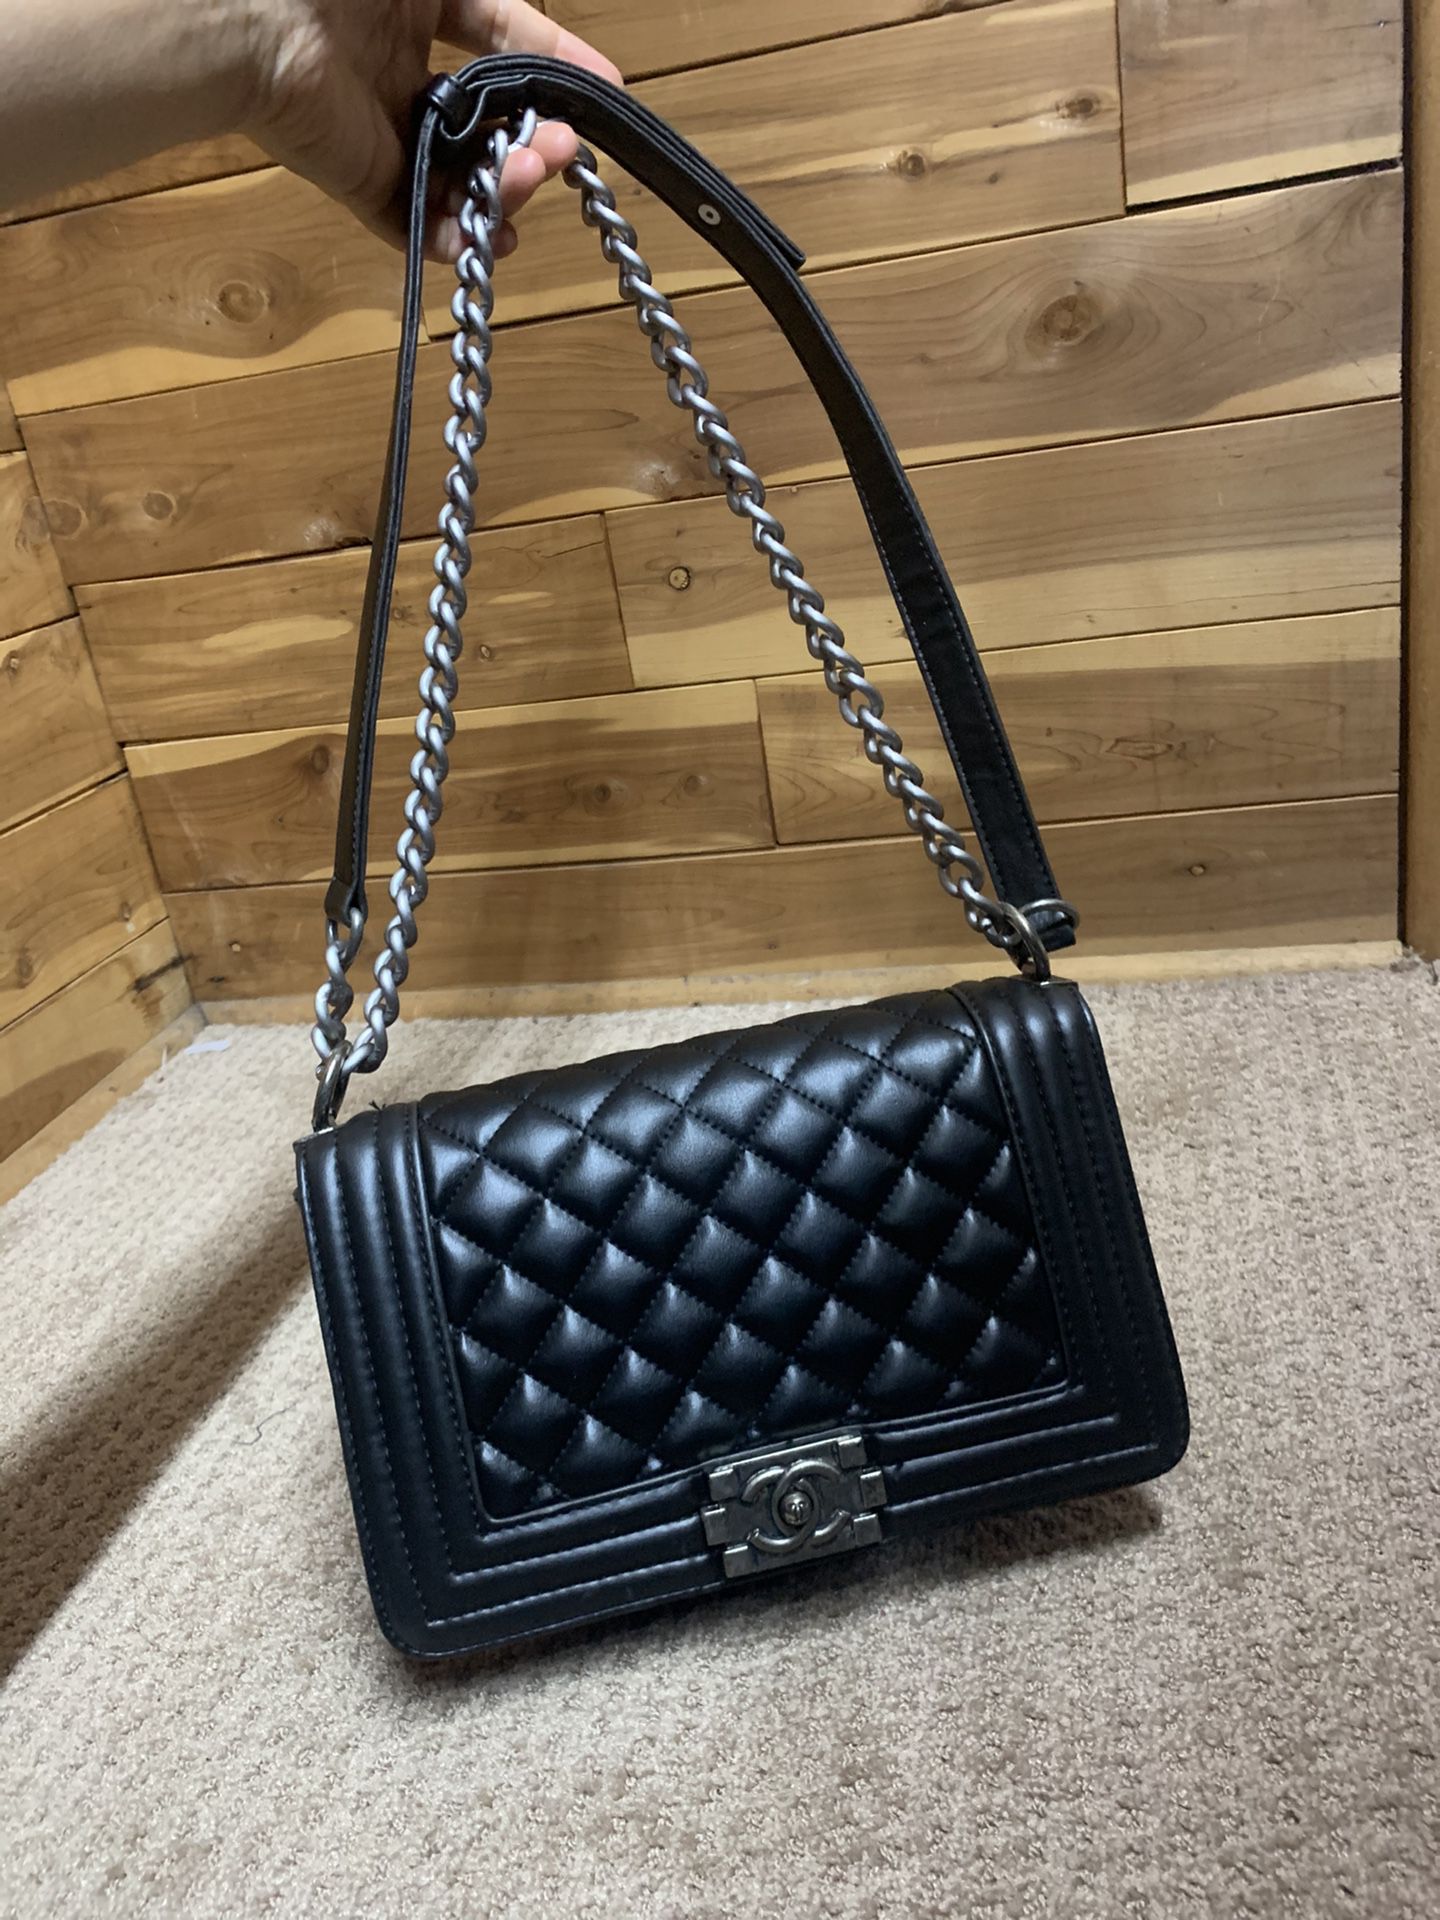 New Chanel bag leather black